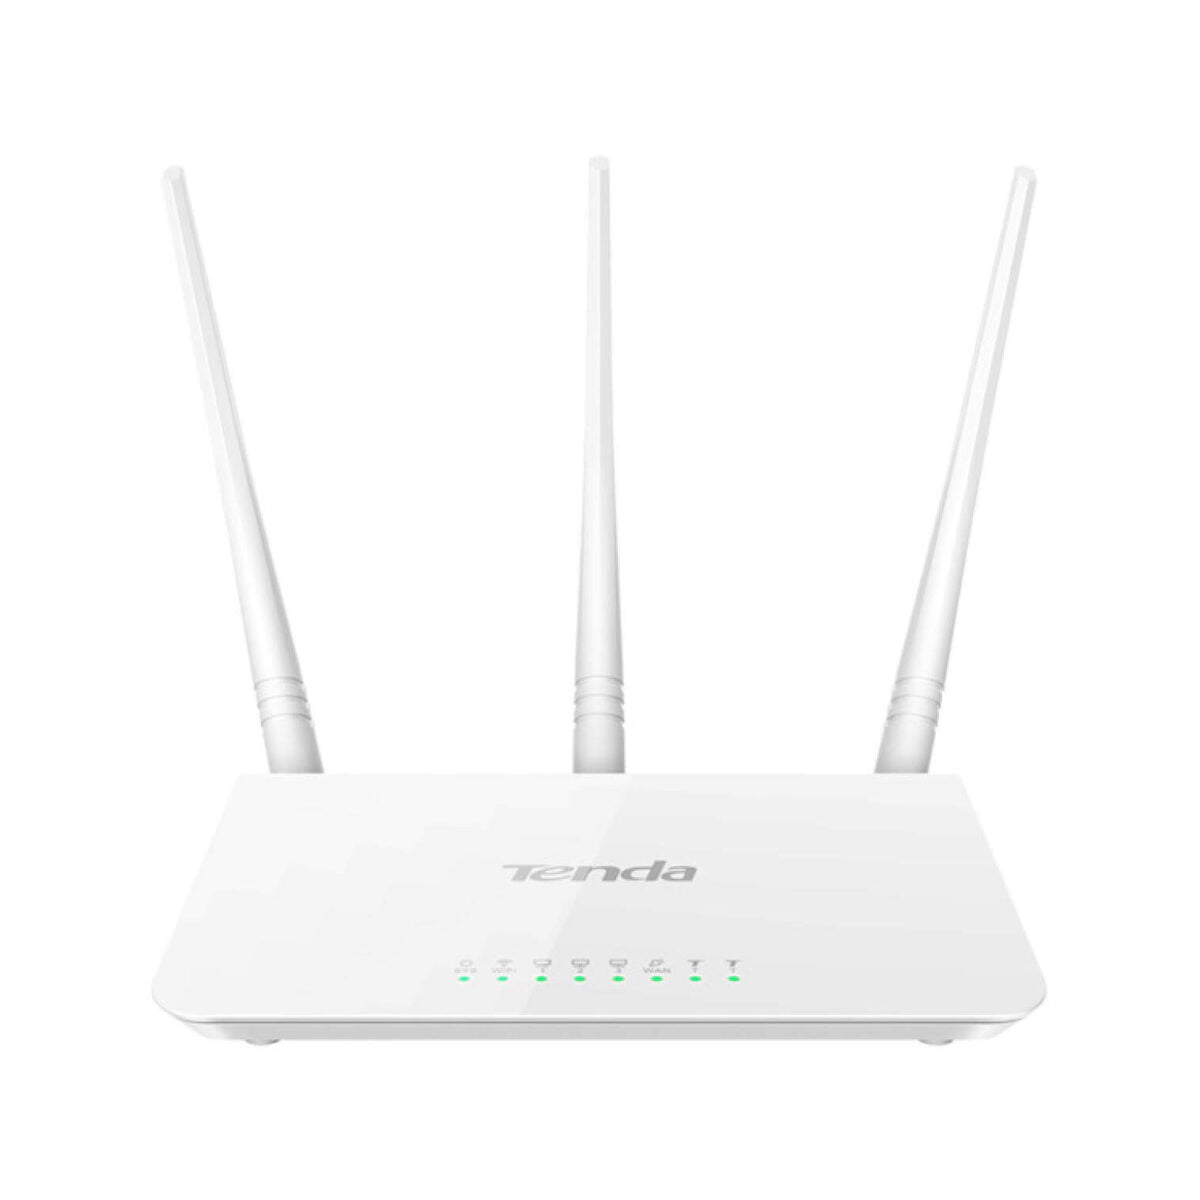 Tenda 300Mbps Wi-Fi Router and Repeater | F3